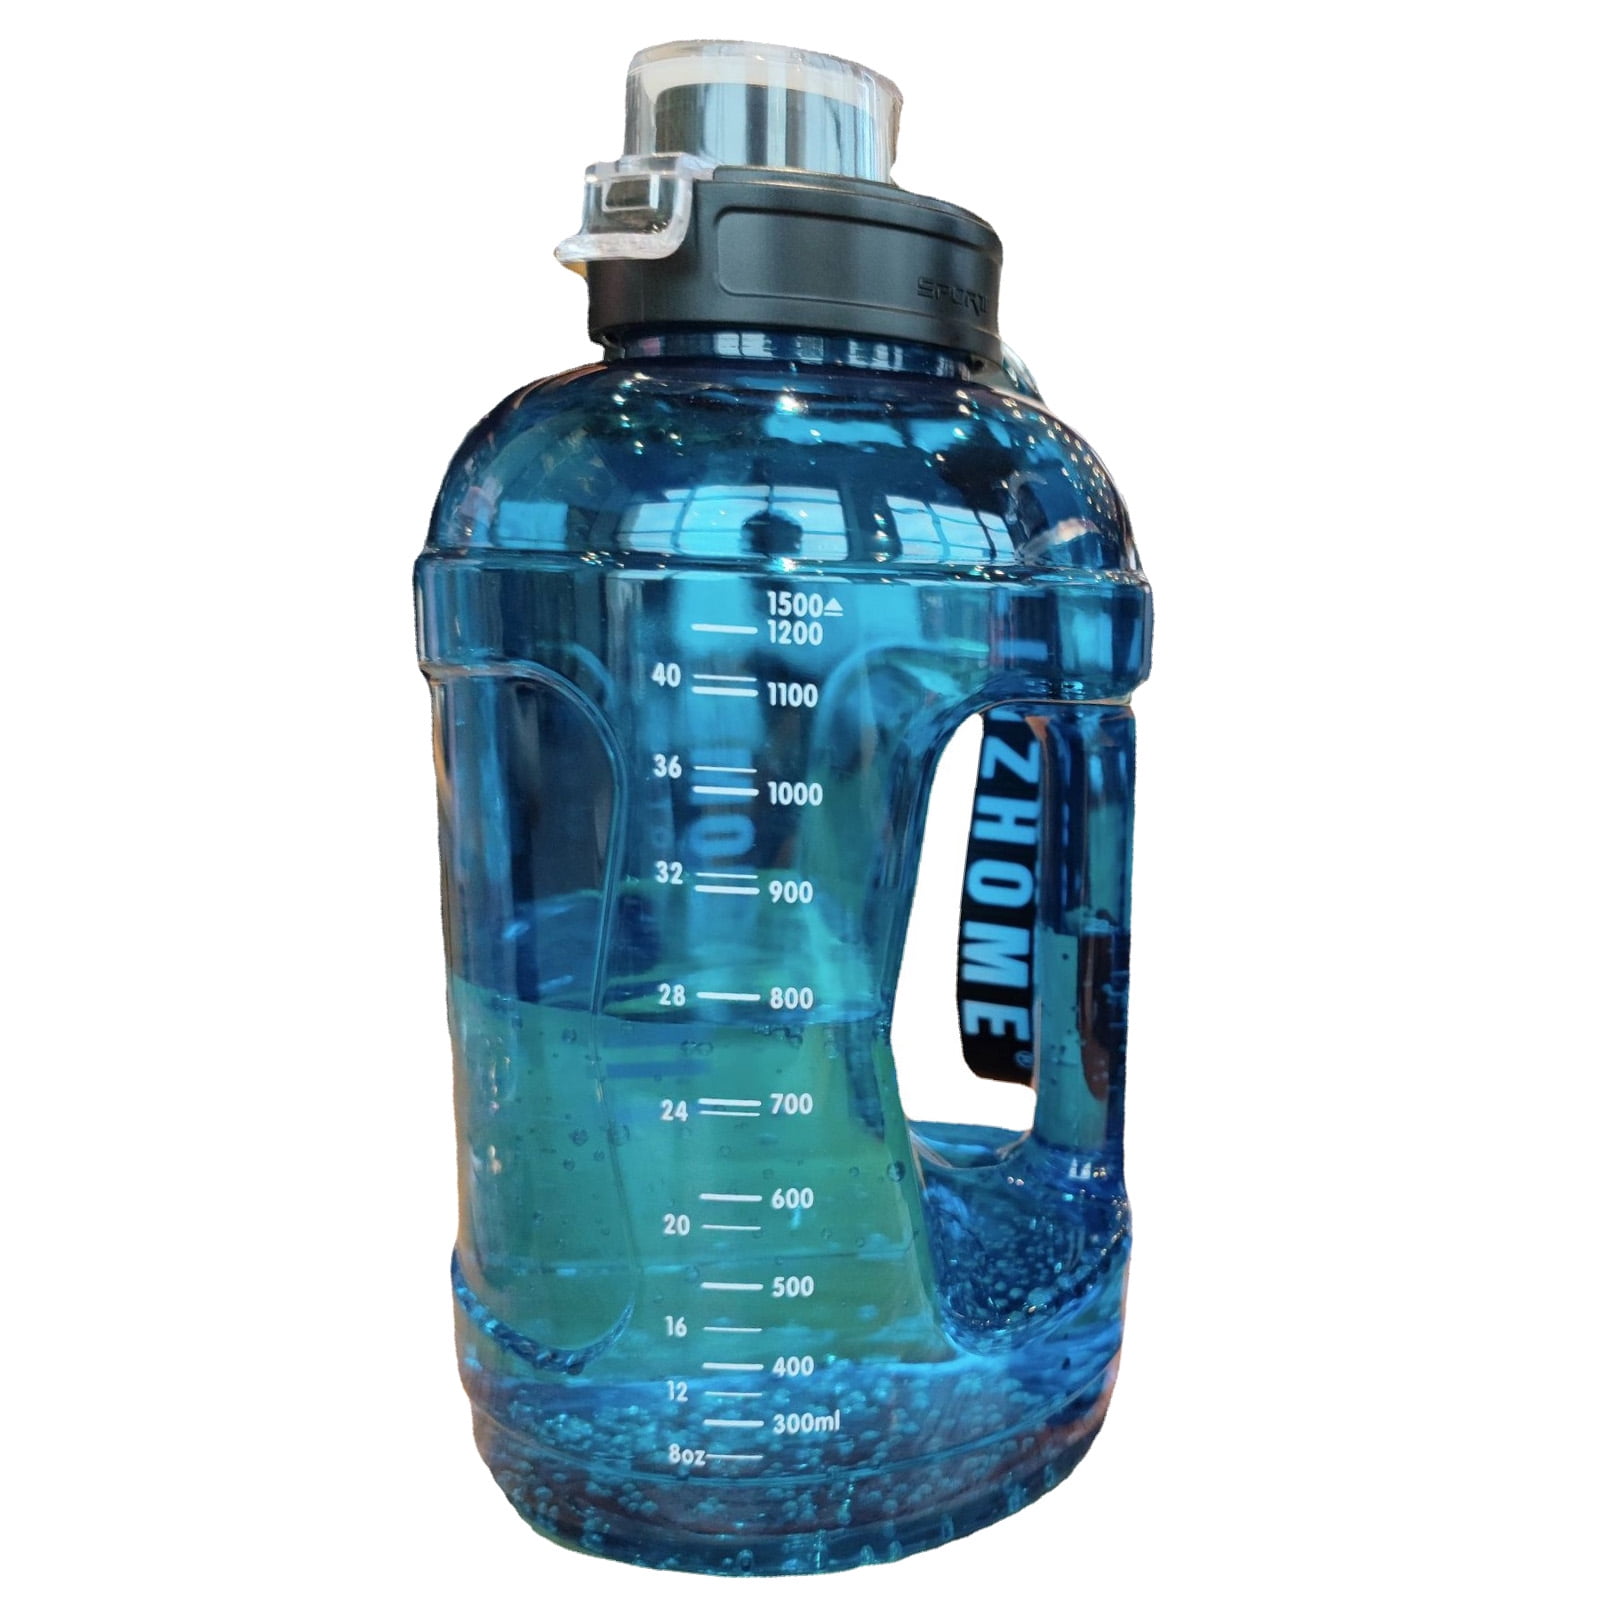 Yesbay 600ml Water Bottle Good Seal Leakproof Transparent with Strap Water Storage Food Grade Can Store Pills Water Drinking Bottle Water Drinking